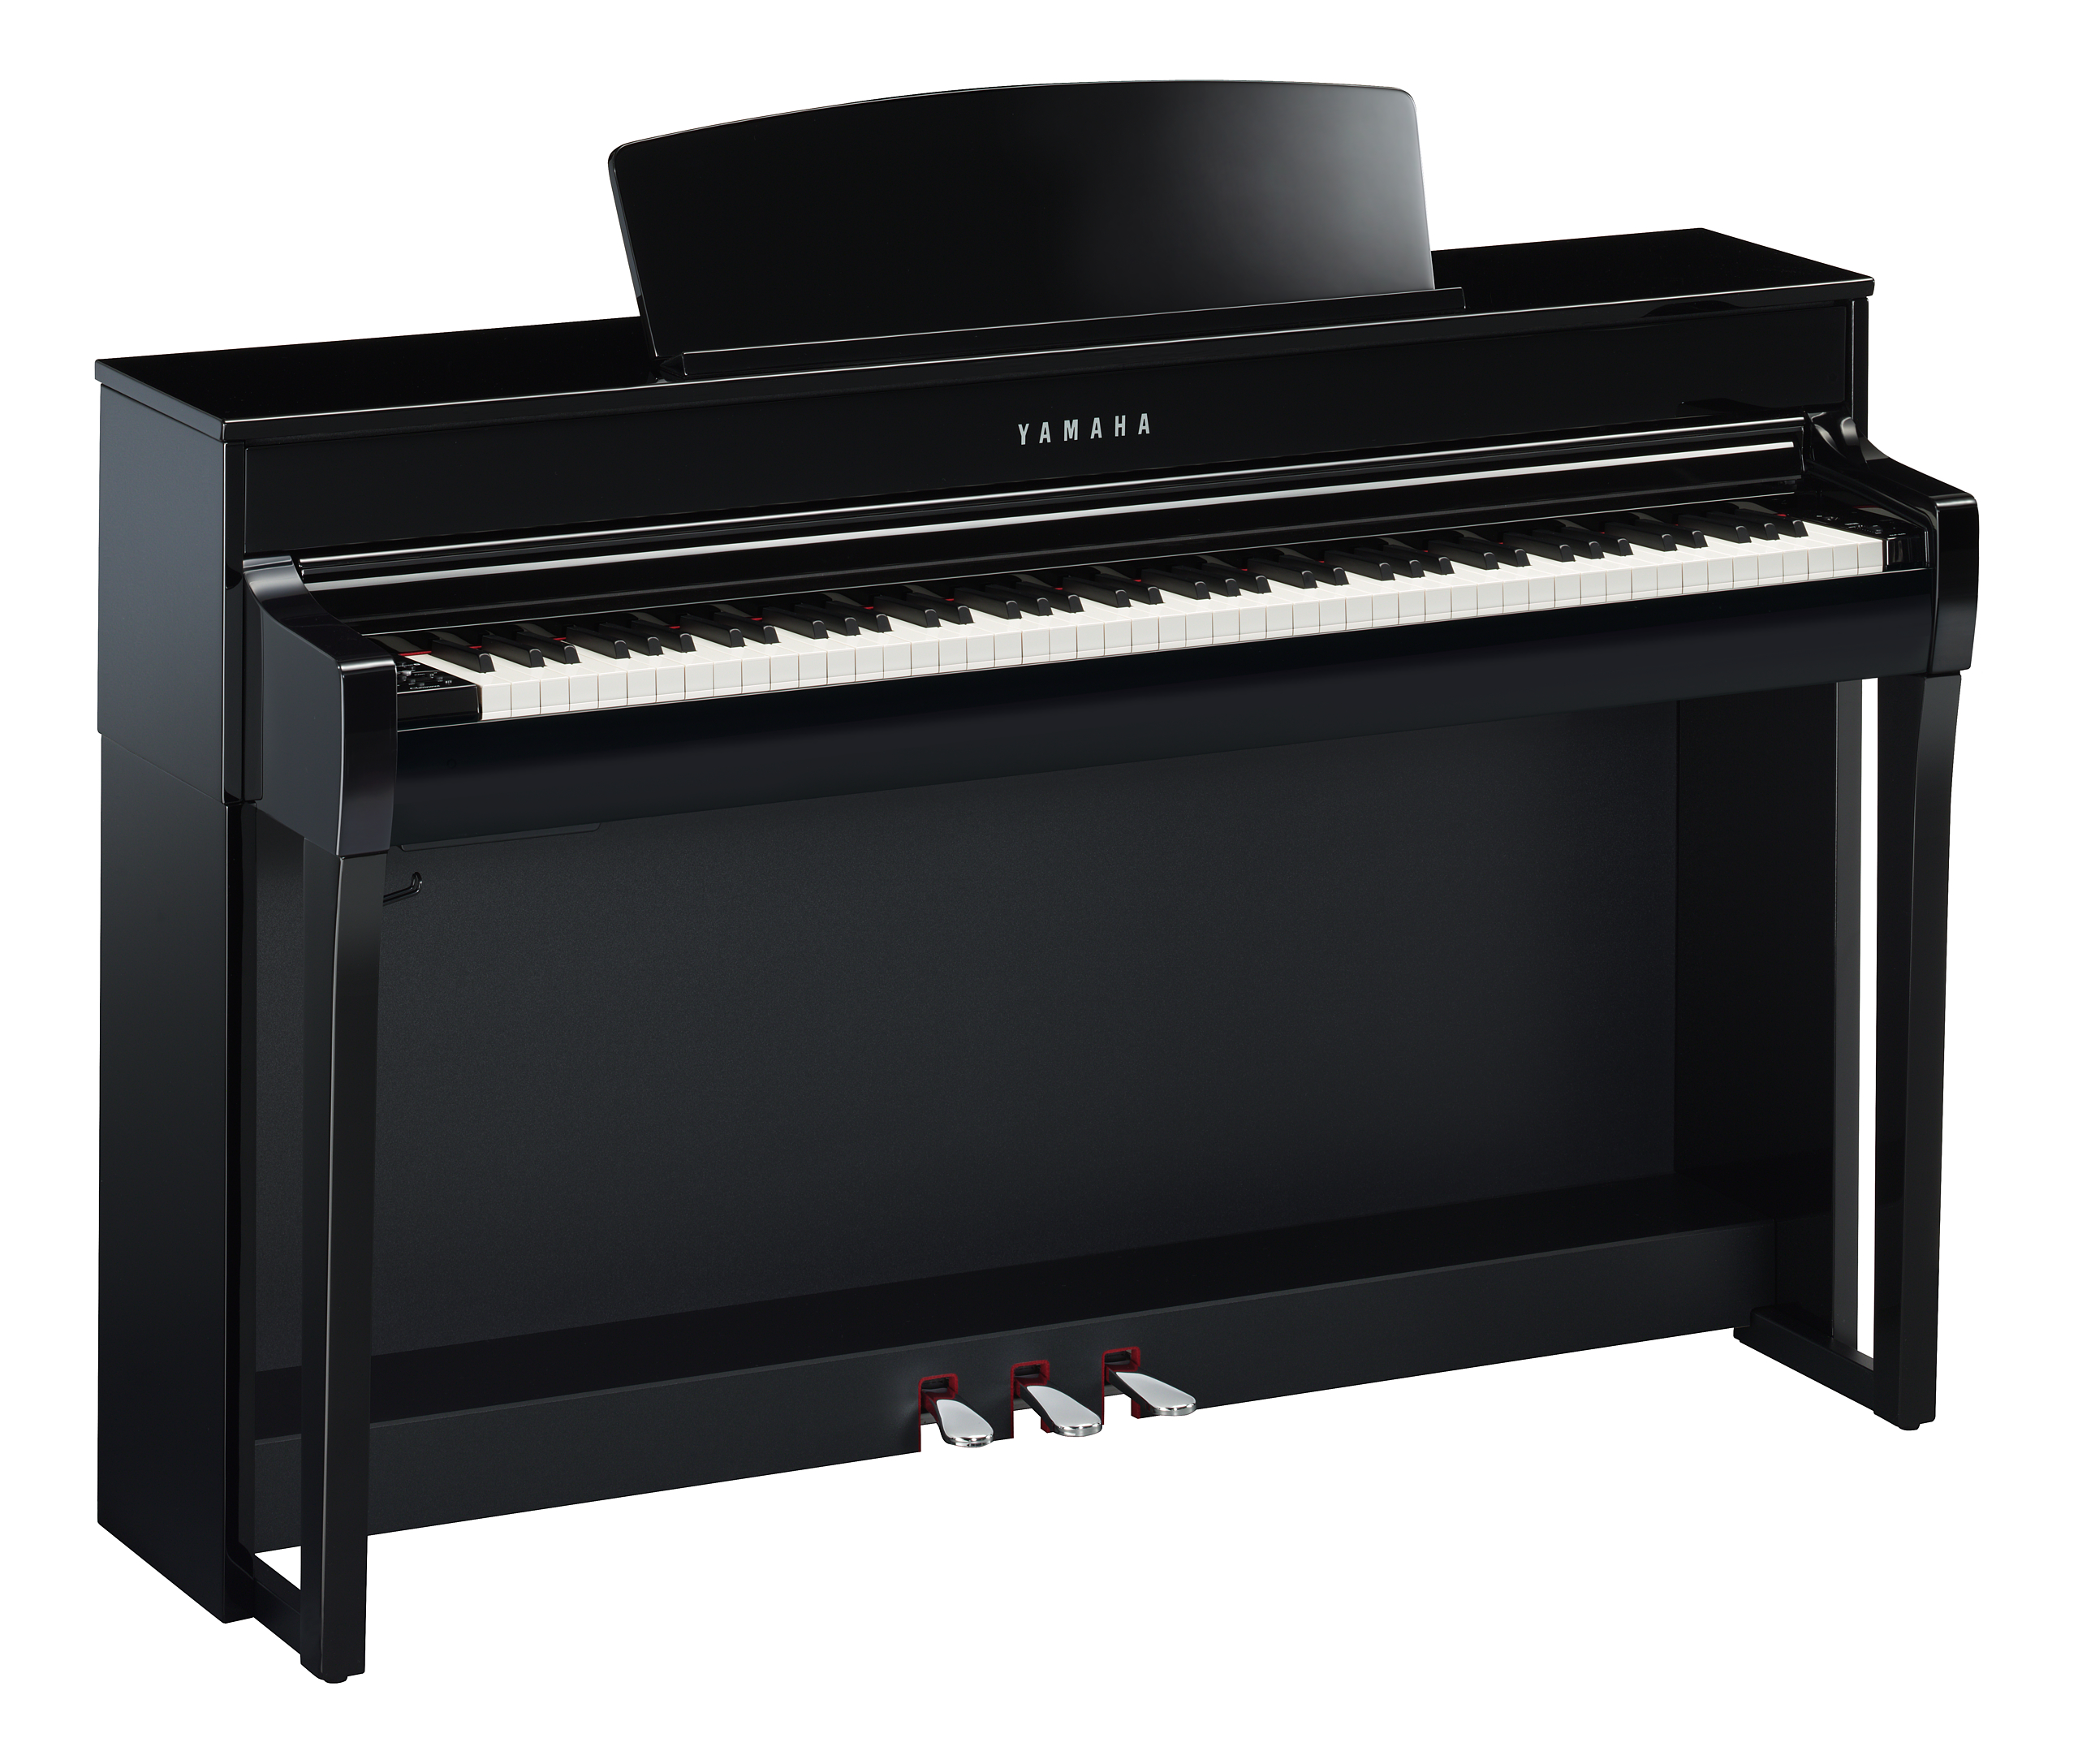 Yamaha Clp745pe - Digital piano with stand - Variation 1